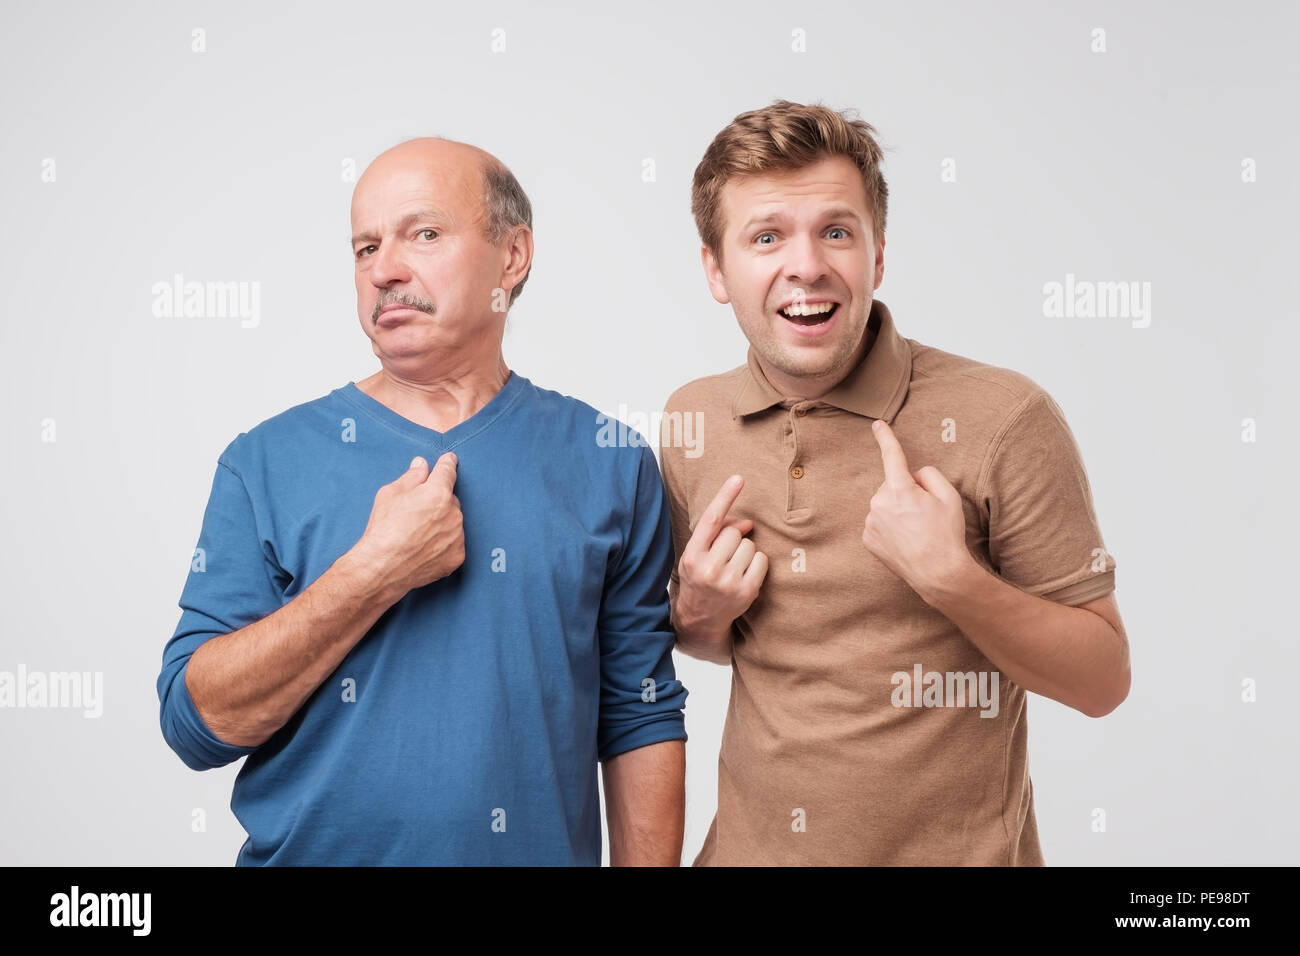 Two shocked, surprised, mature men looking asking question, you talking to me, you mean me. Select me please concept. Human emotions, facial expressio Stock Photo